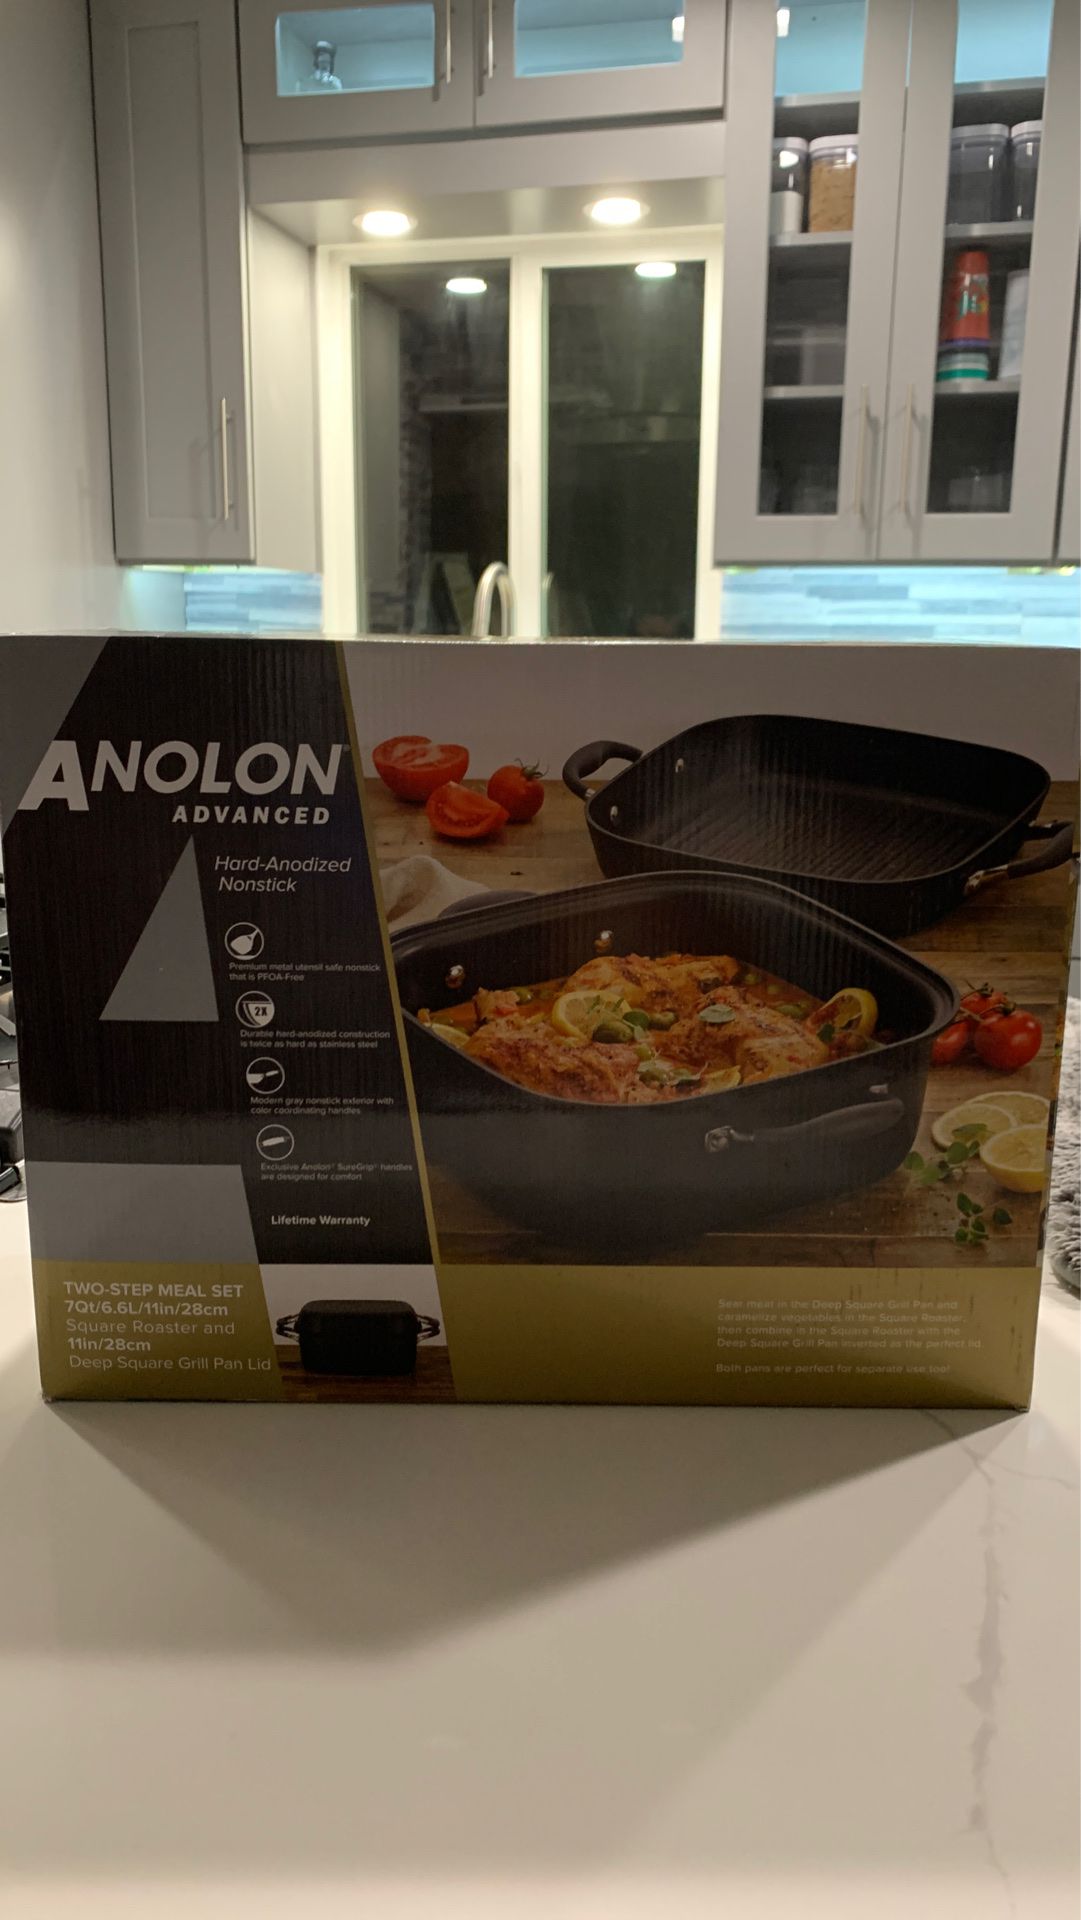 Anolon Advanced Home Hard-Anodized Nonstick 7 qt. Square Roaster/Grill Pan Set in Moonstone